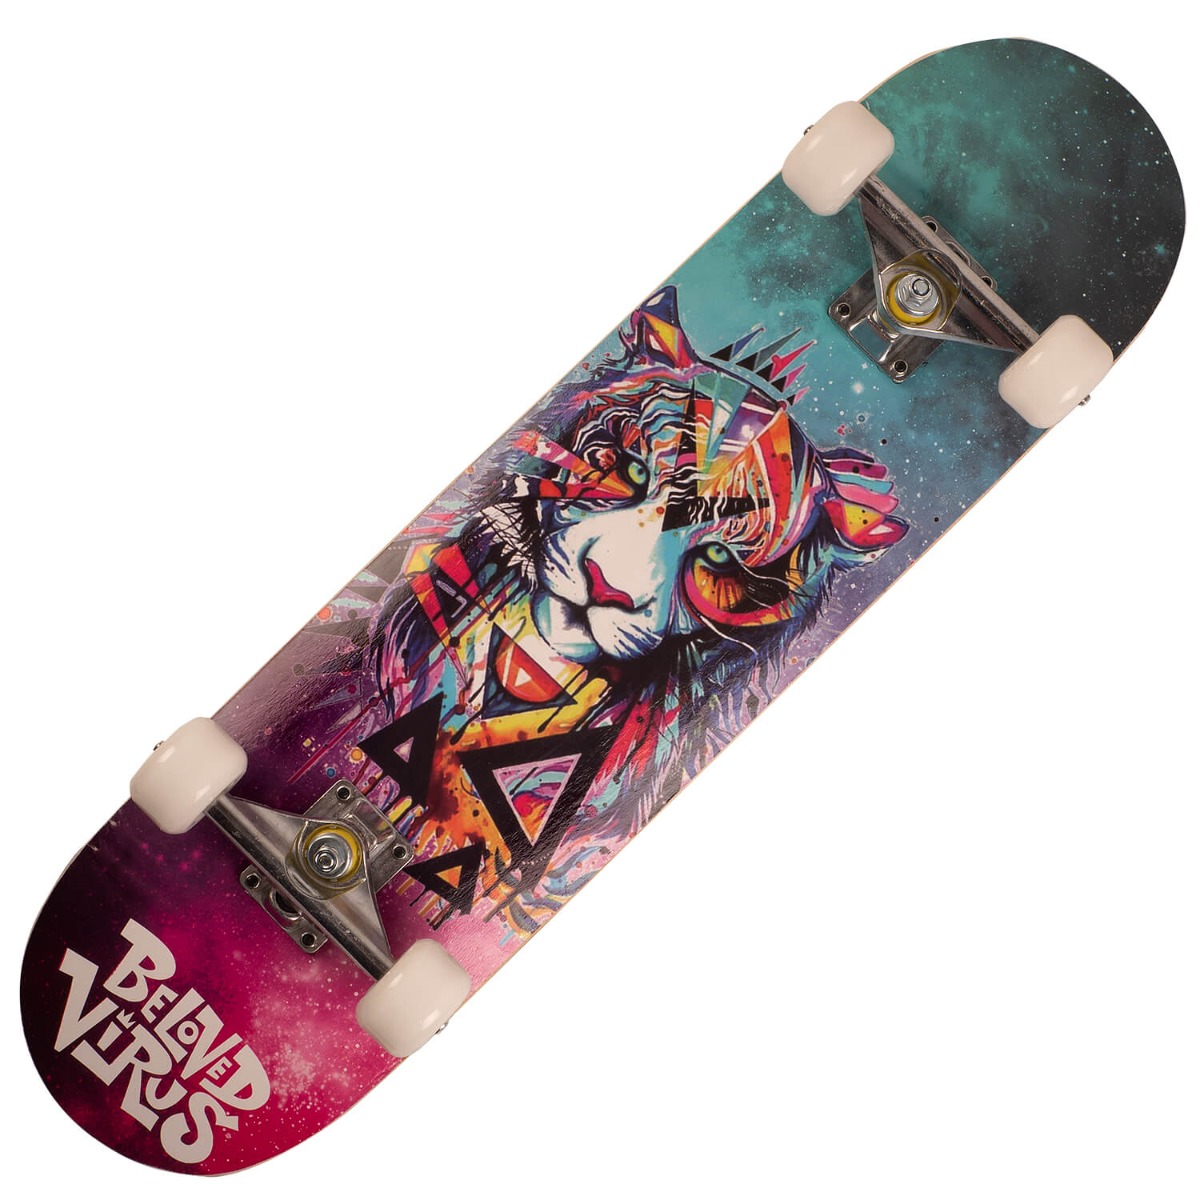 Skateboard Action One, ABEC-7 Aluminiu, 79 X 20 cm, Multicolor Be Loved Action One